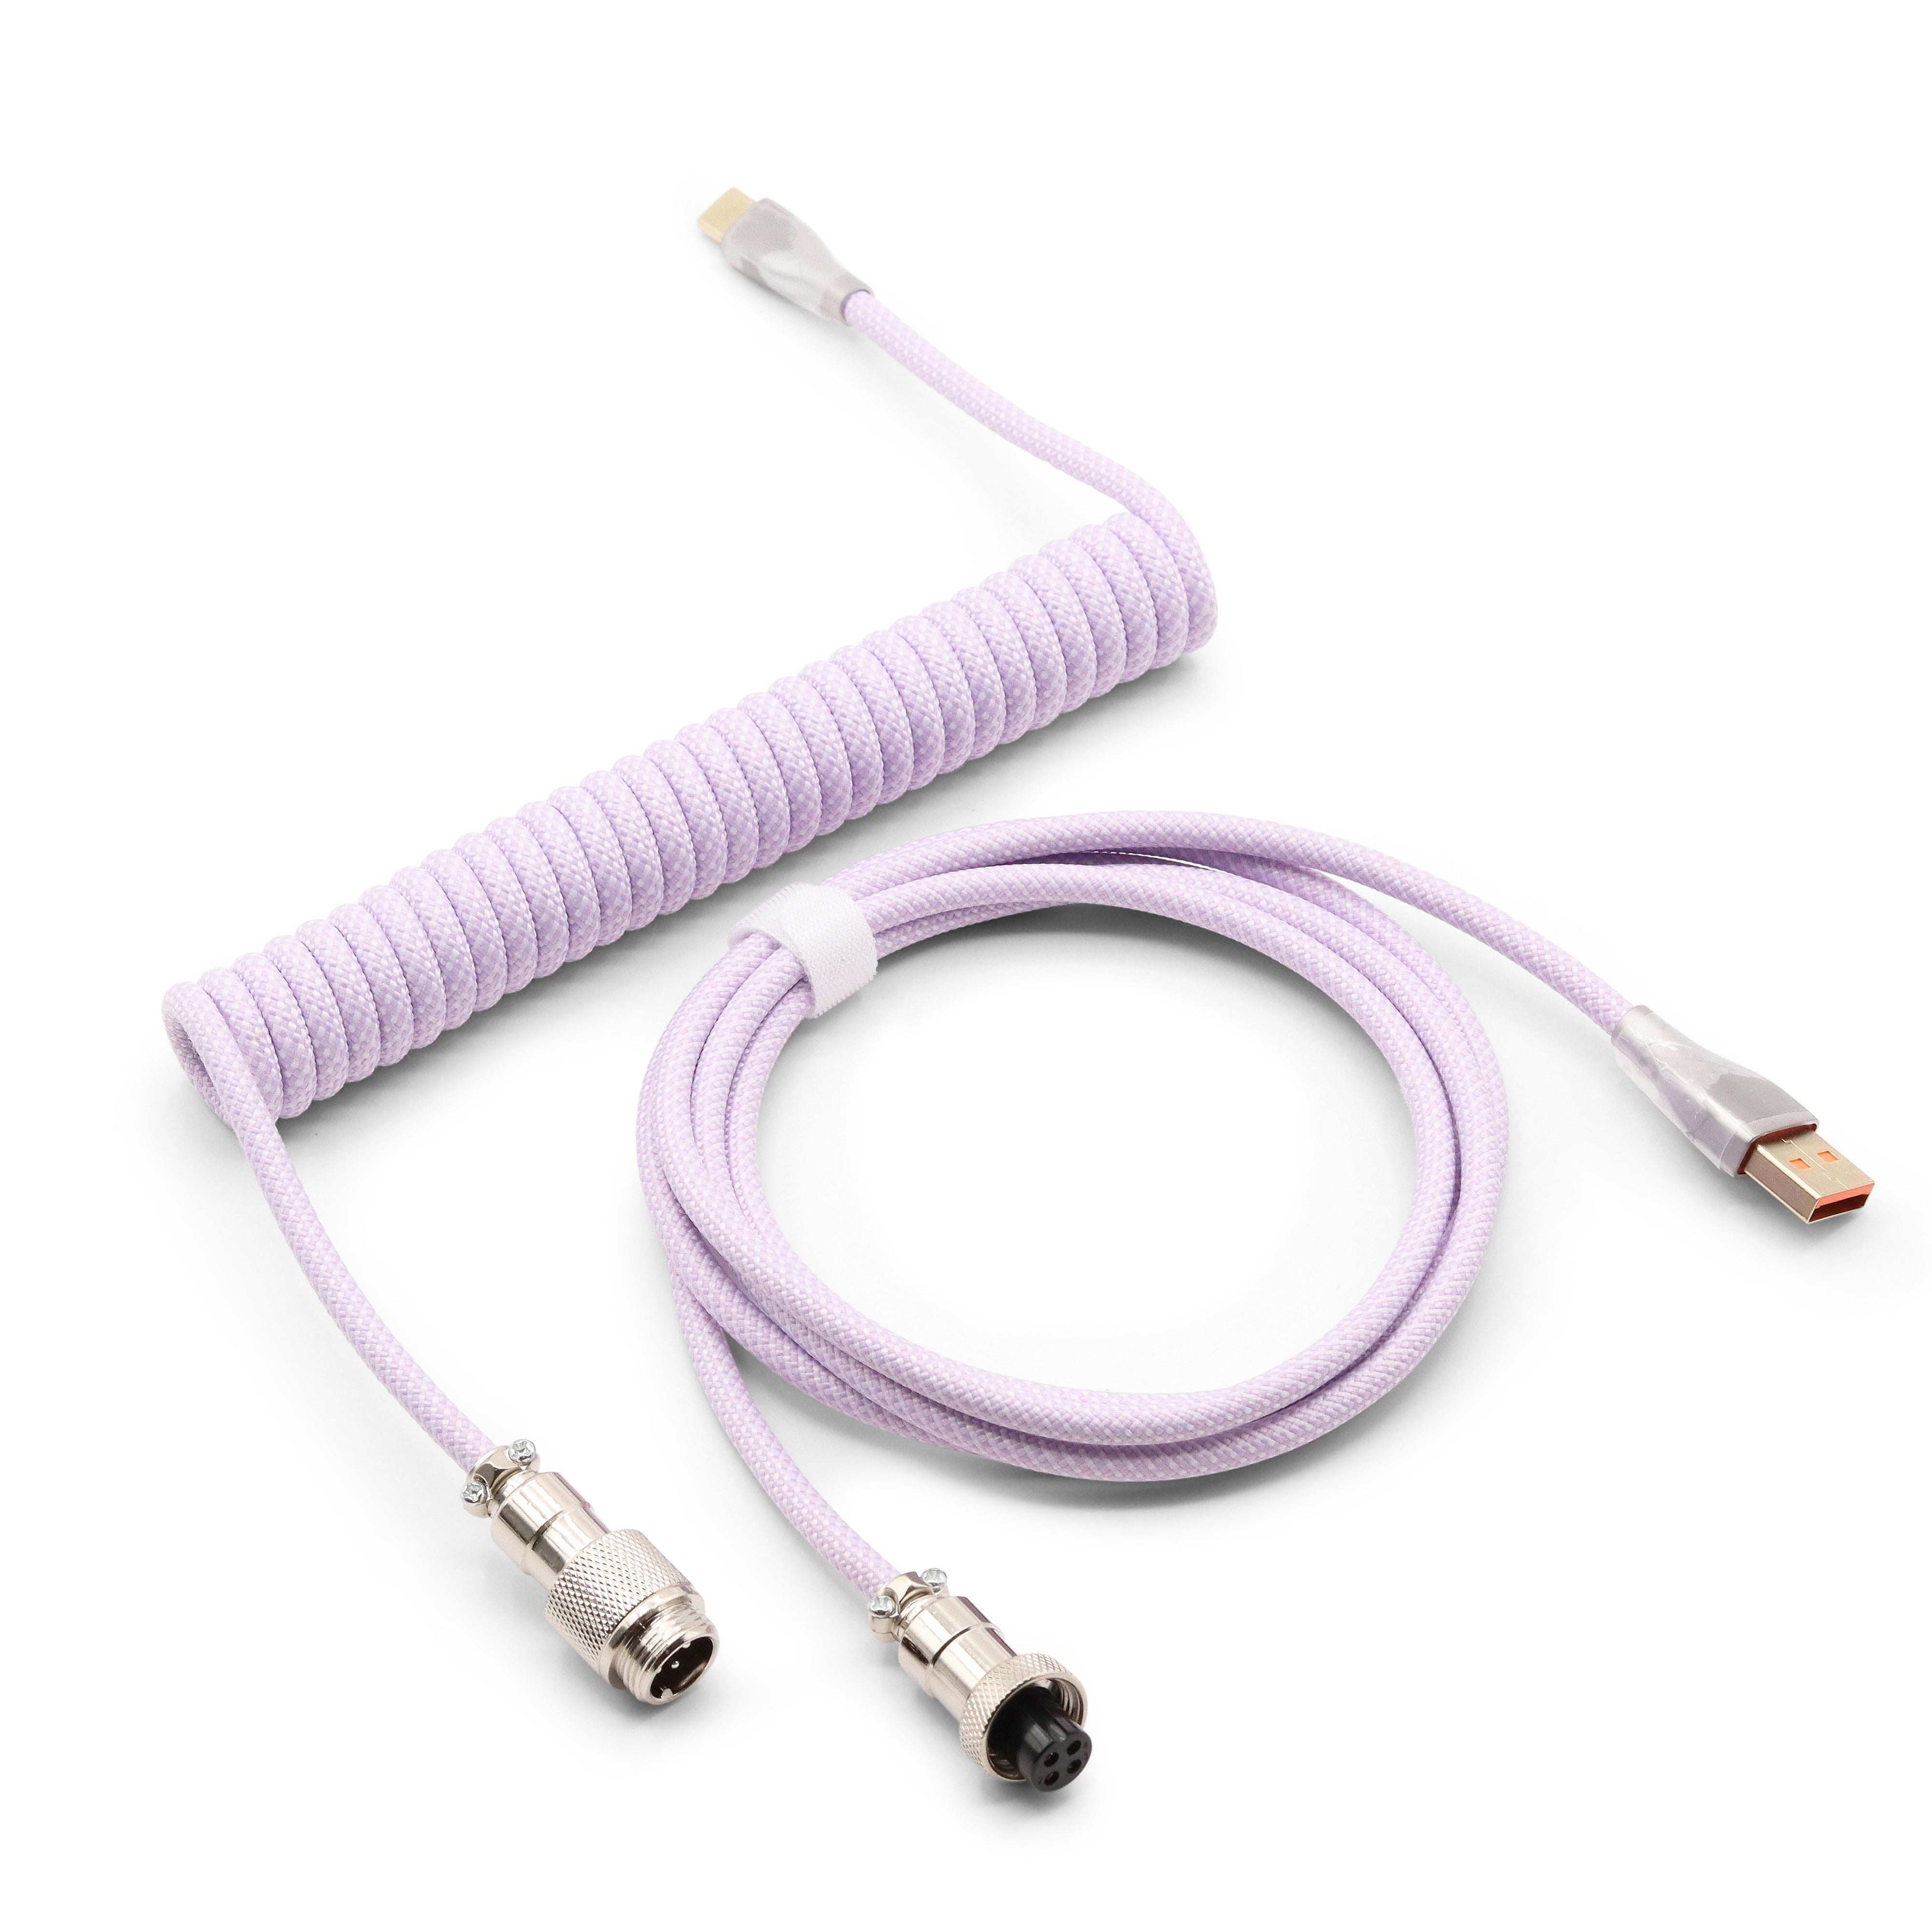 Glacier Premium Durable Quality Braided USB-C to USB-A Coiled Cable with Detachable Metal Aviator Connector Plug for Mechanical Keyboard-Purple-